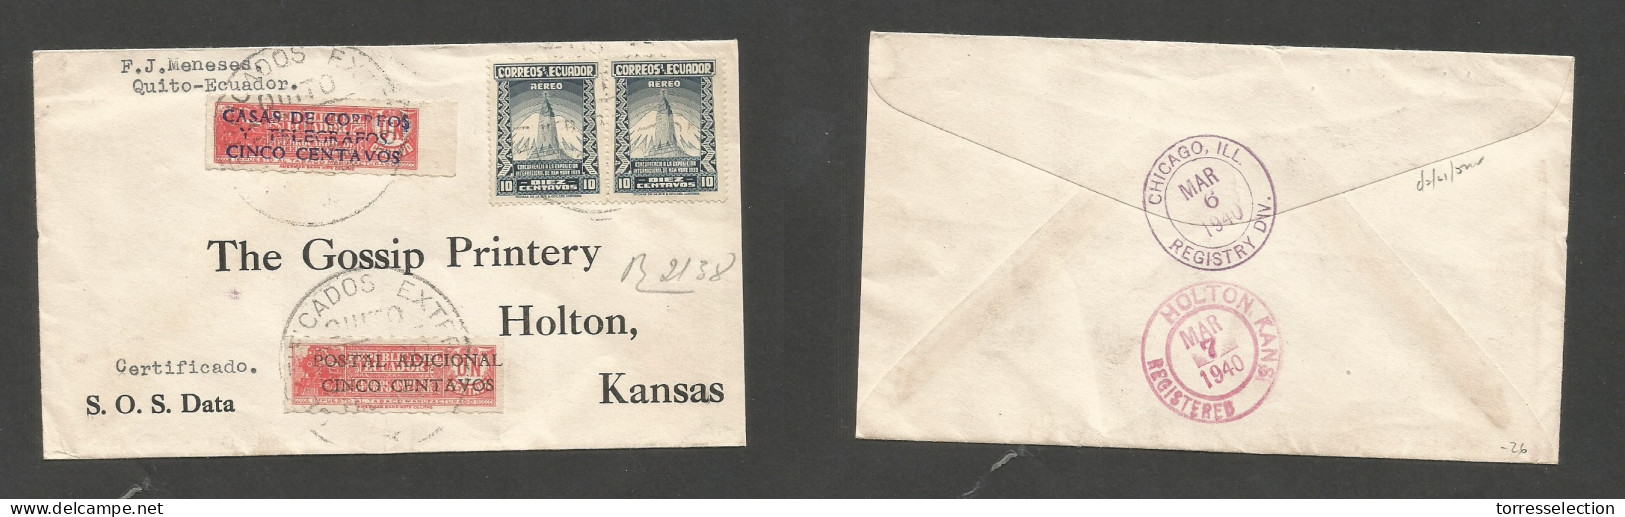 ECUADOR. 1940. Quito - USA, Kansas, Holton (6-7 March) Registered Multifkd Env At 30c Rate. Double Provisional Rate. XSA - Equateur